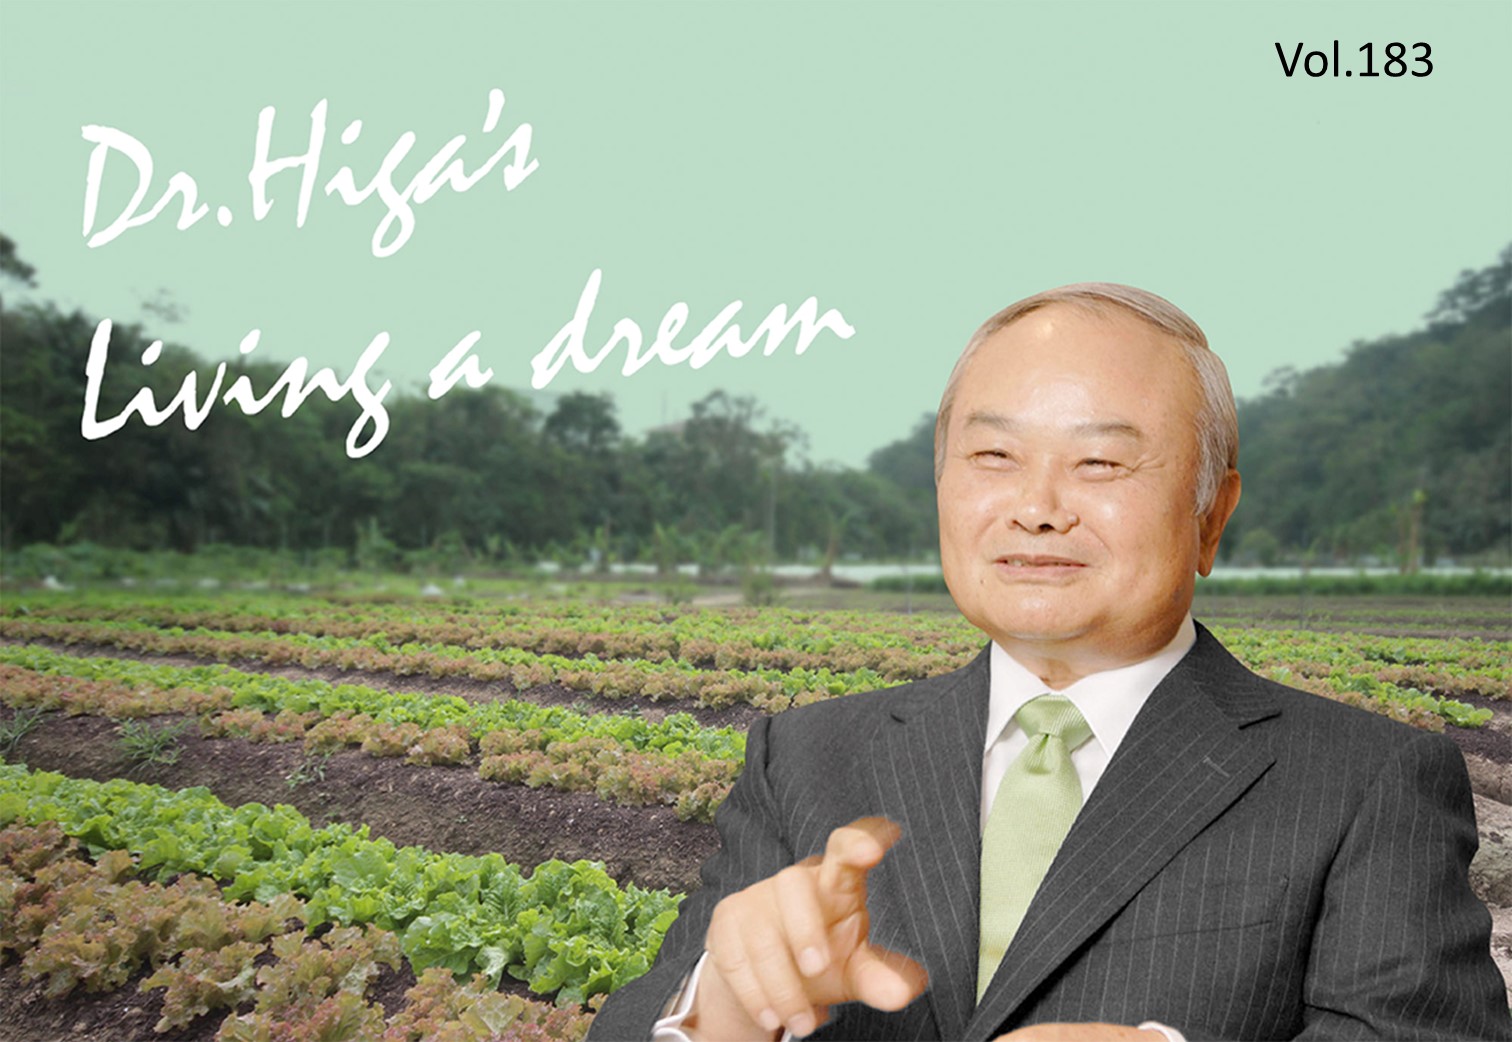 Dr. Higa's "Living a Dream": the latest article #183 is up!!!